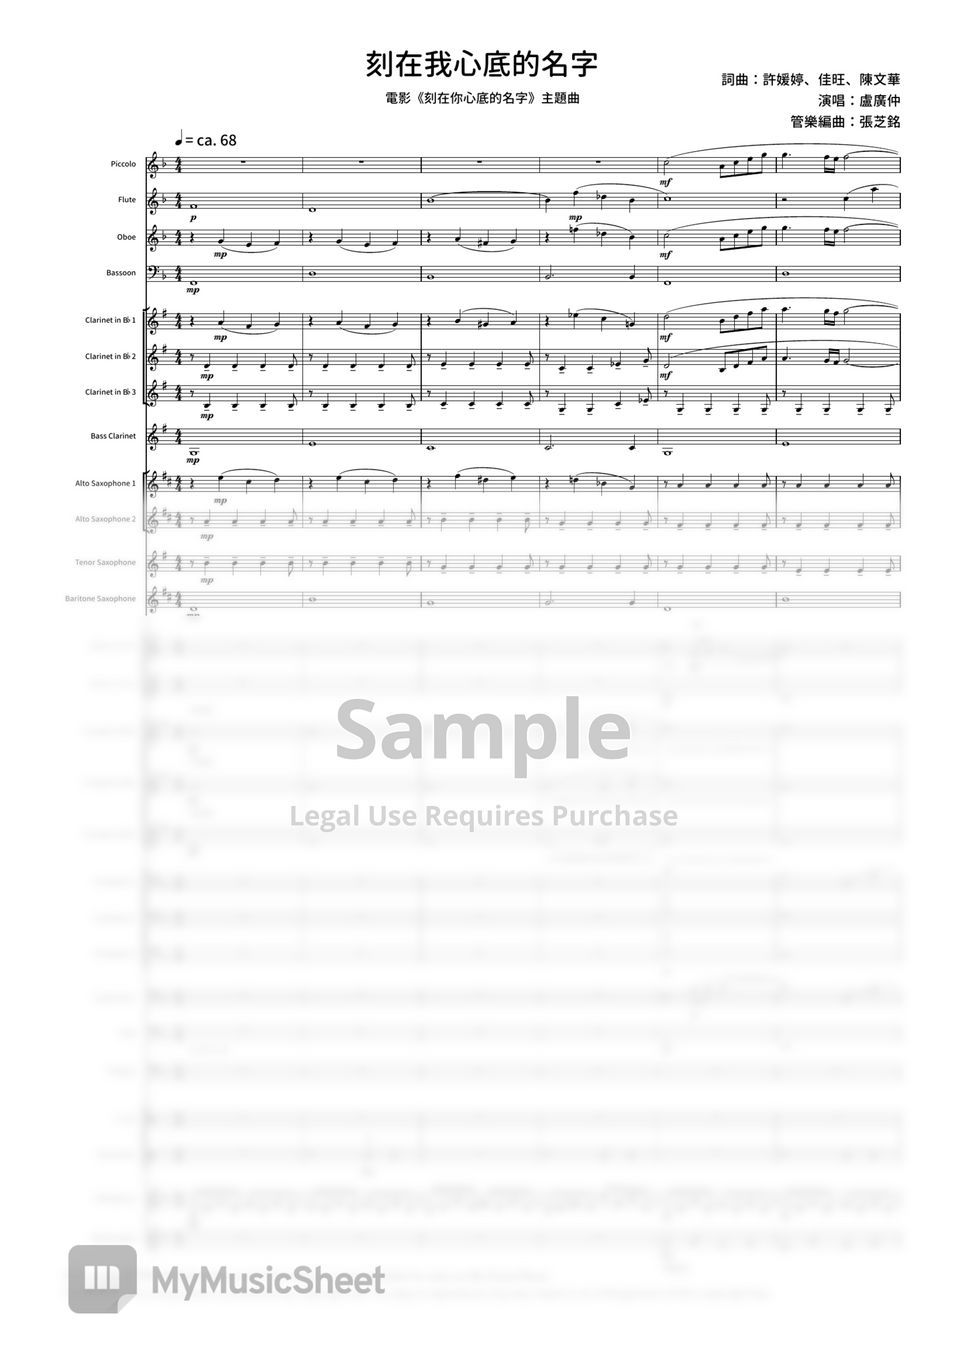 Crowd Lu - Full Score & Parts - Your Name Engraved Herein (Wind Band Version) by 張芝銘、許永慶